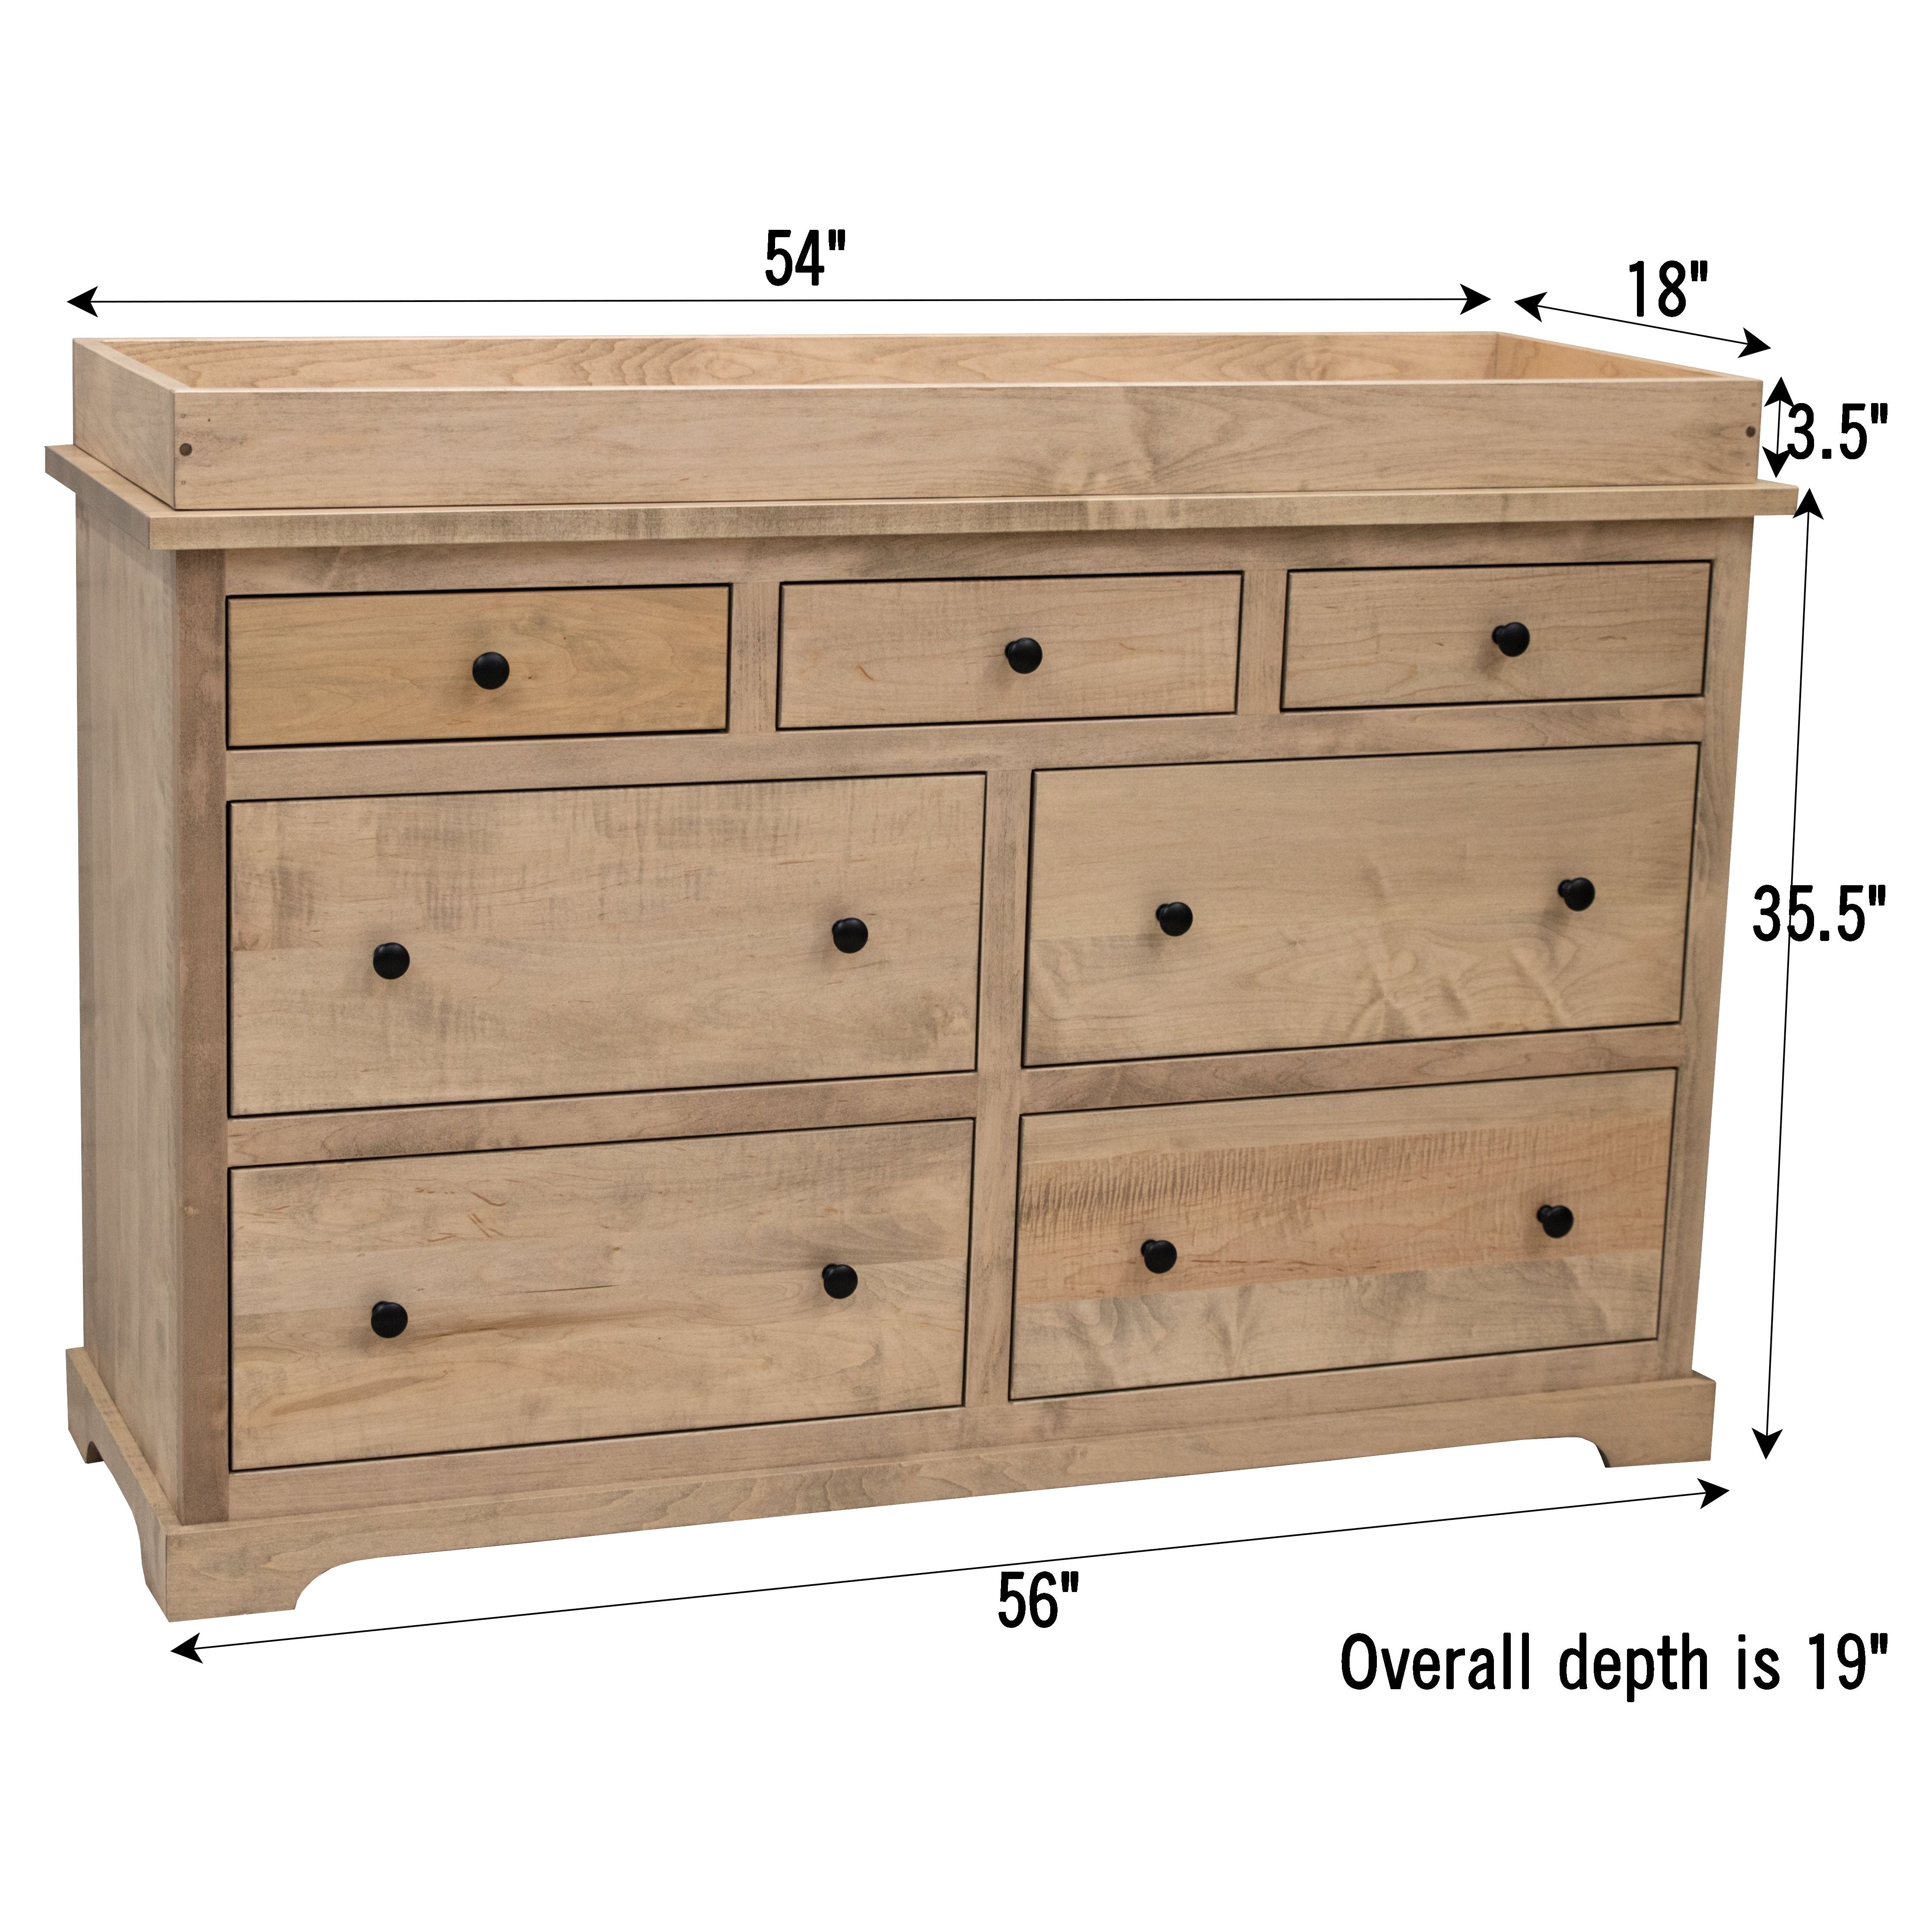 Lakeport Nursery Dresser with Changing Topper